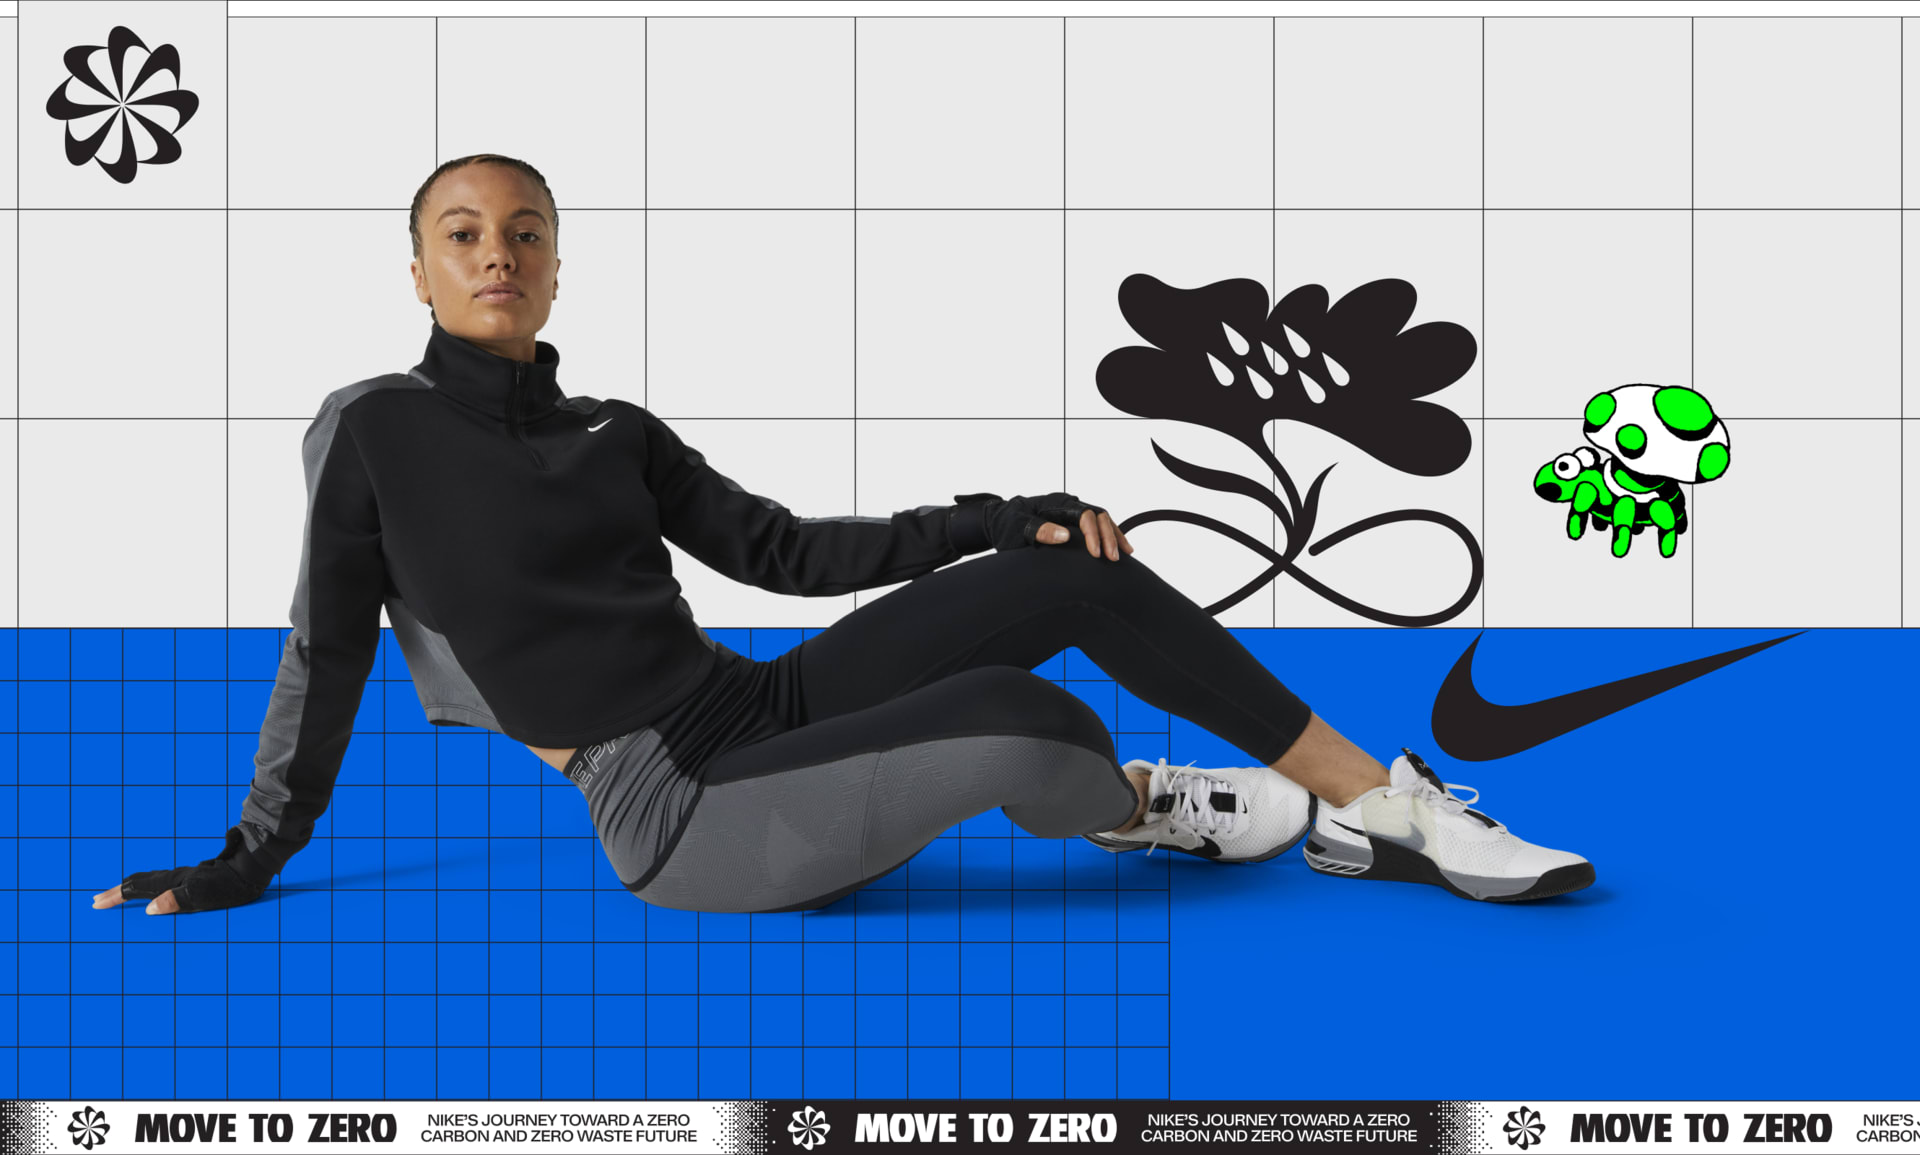 Titolo  Shop Wmns Nike Ribbed Sports Utility Leggings with Pockets here at  Titolo